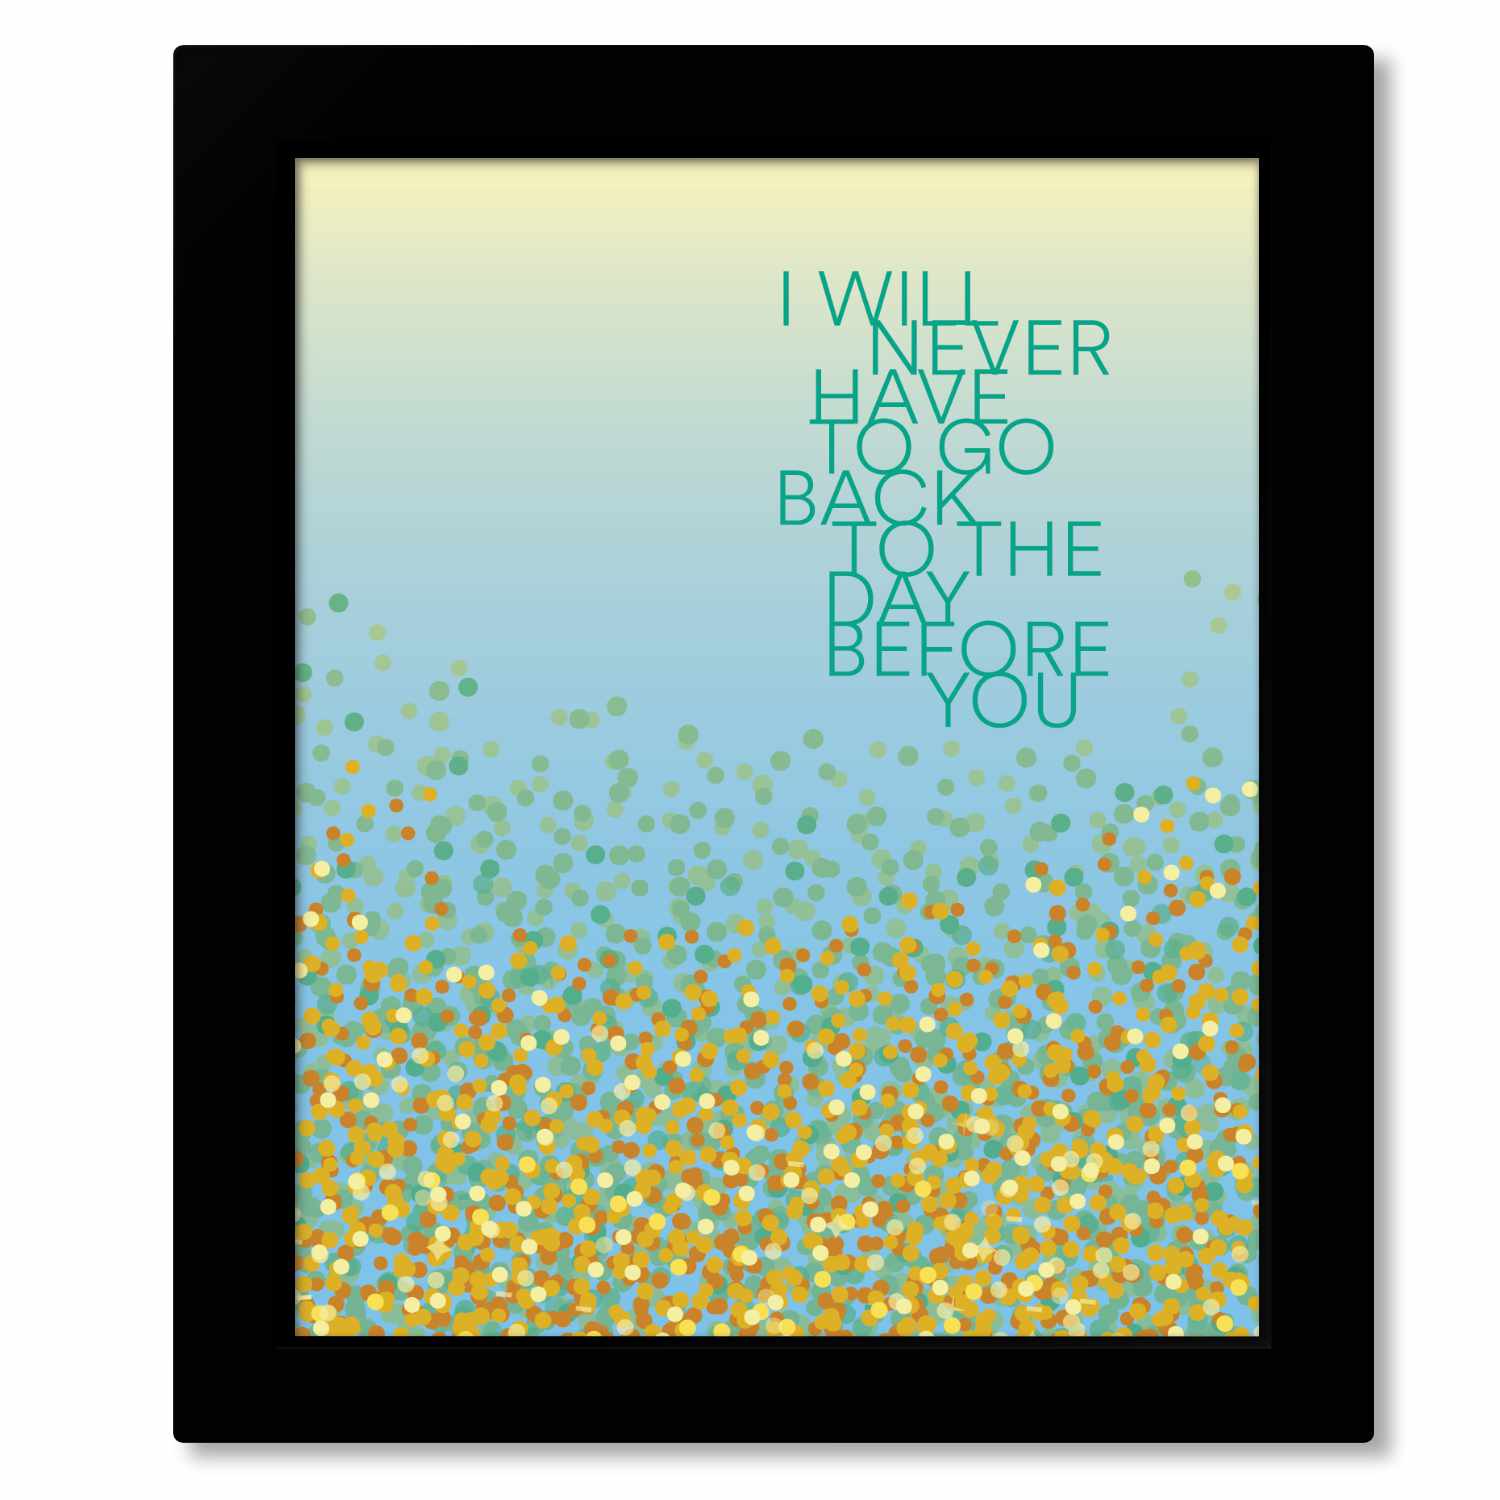 The Day Before You by Matthew West - Song Lyric Art Print Song Lyrics Art Song Lyrics Art 8x10 Framed Print 